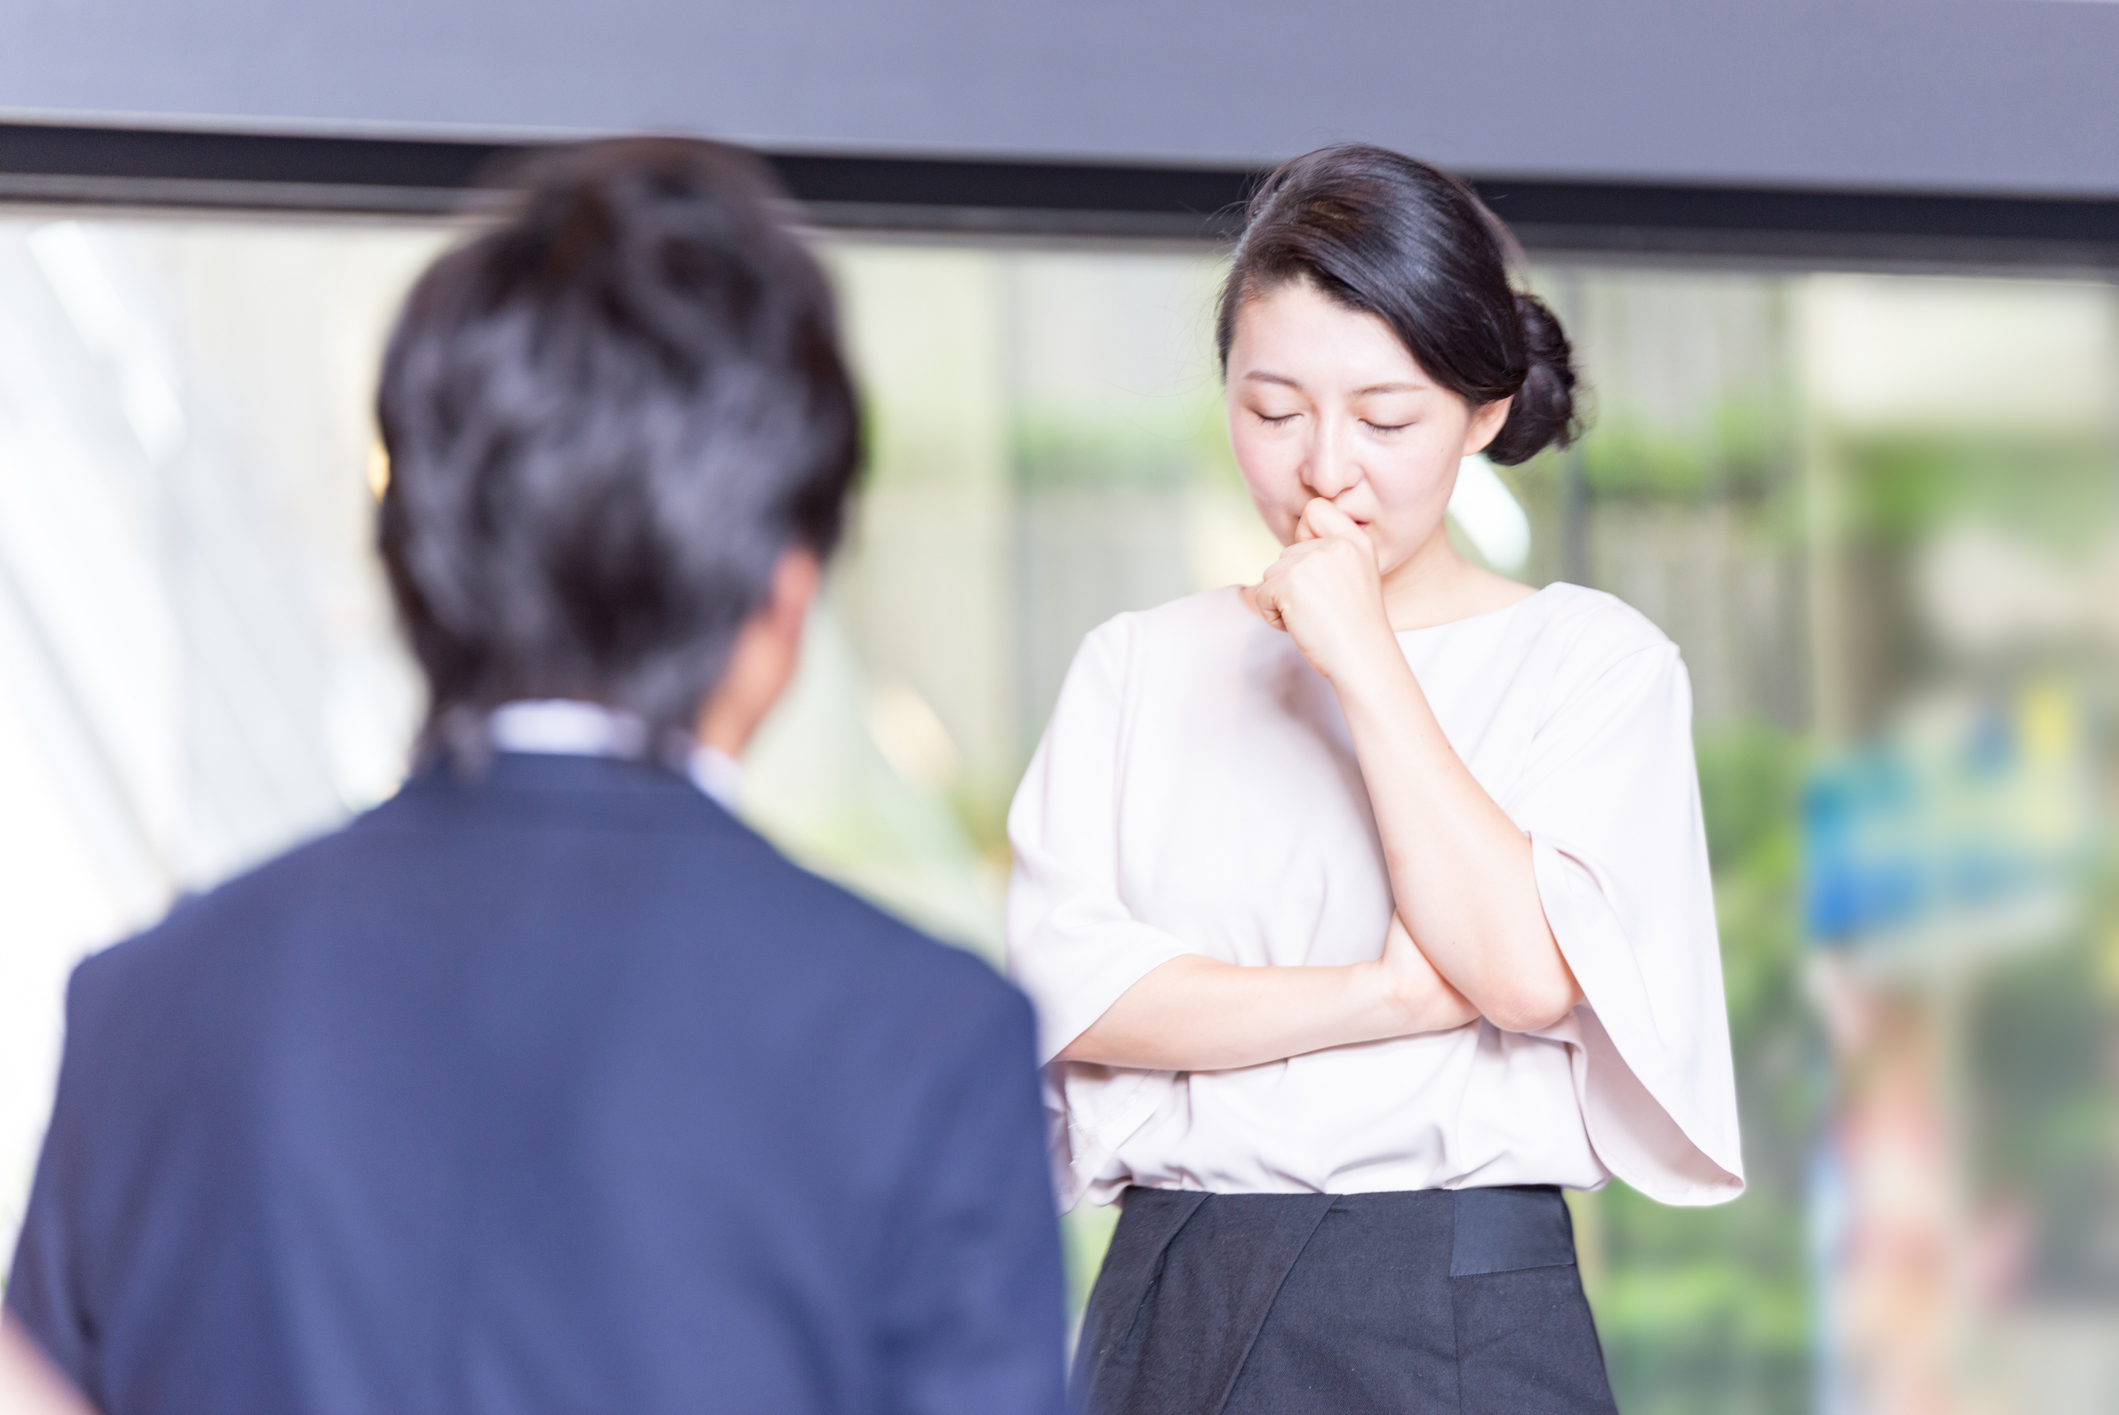 An embarrassed young woman holds her hand to her mouth and stares at the floor during a conversation with a colleague